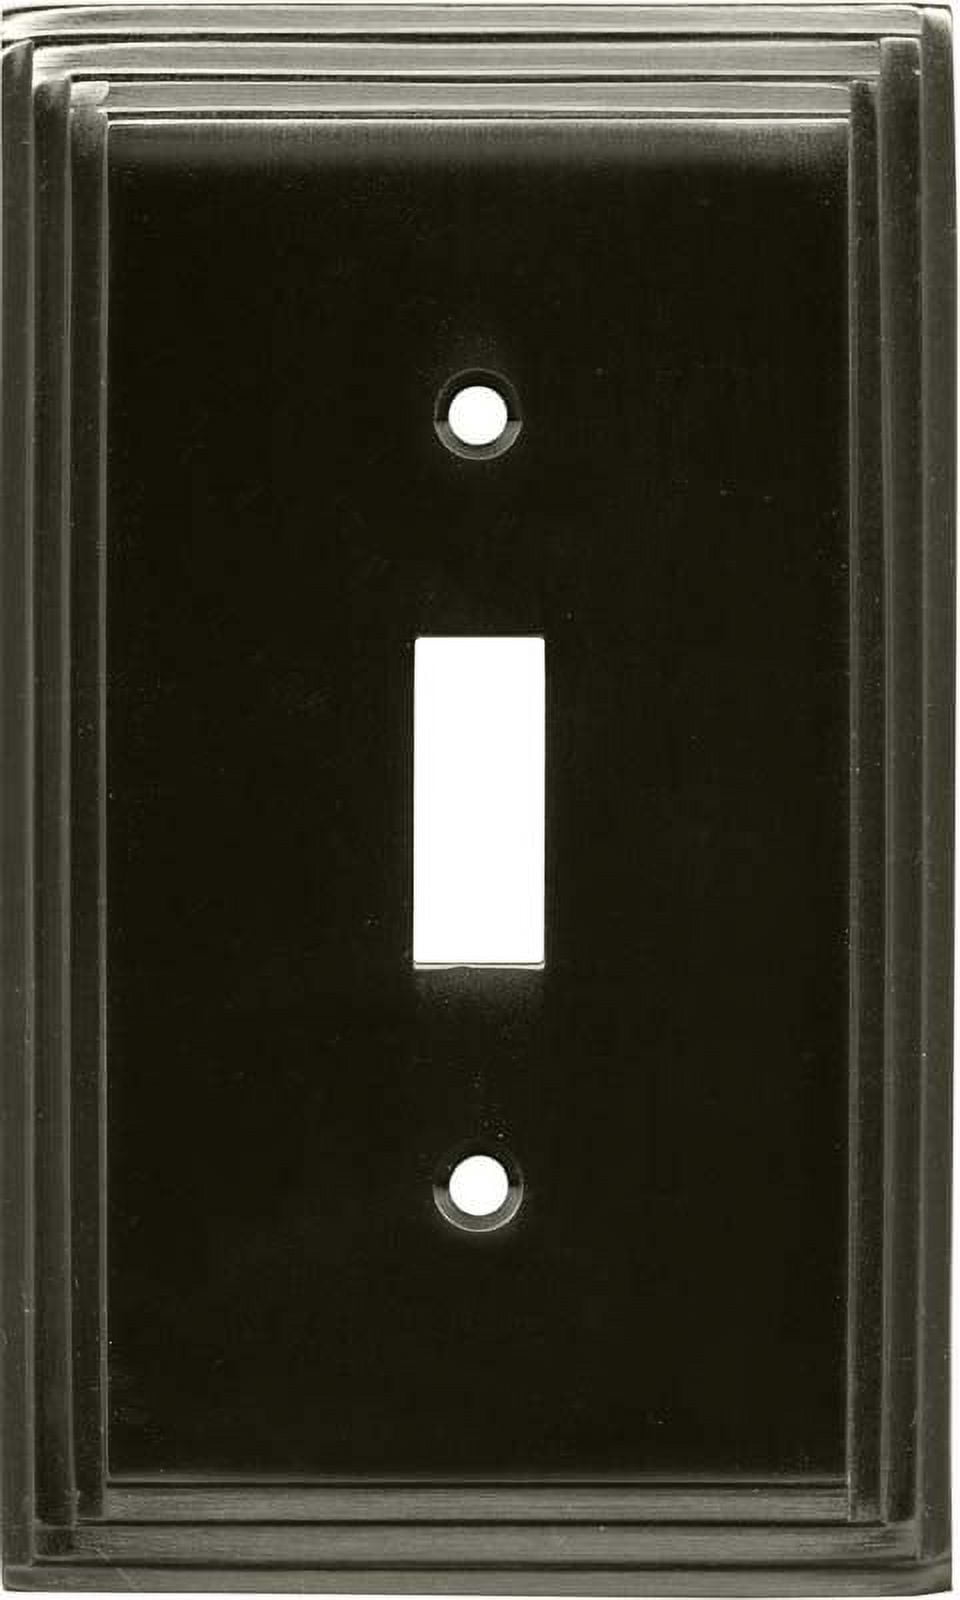 Art Deco Step Satin Nickel - Cable Wall Plates - Wall Plates & Outlet Covers